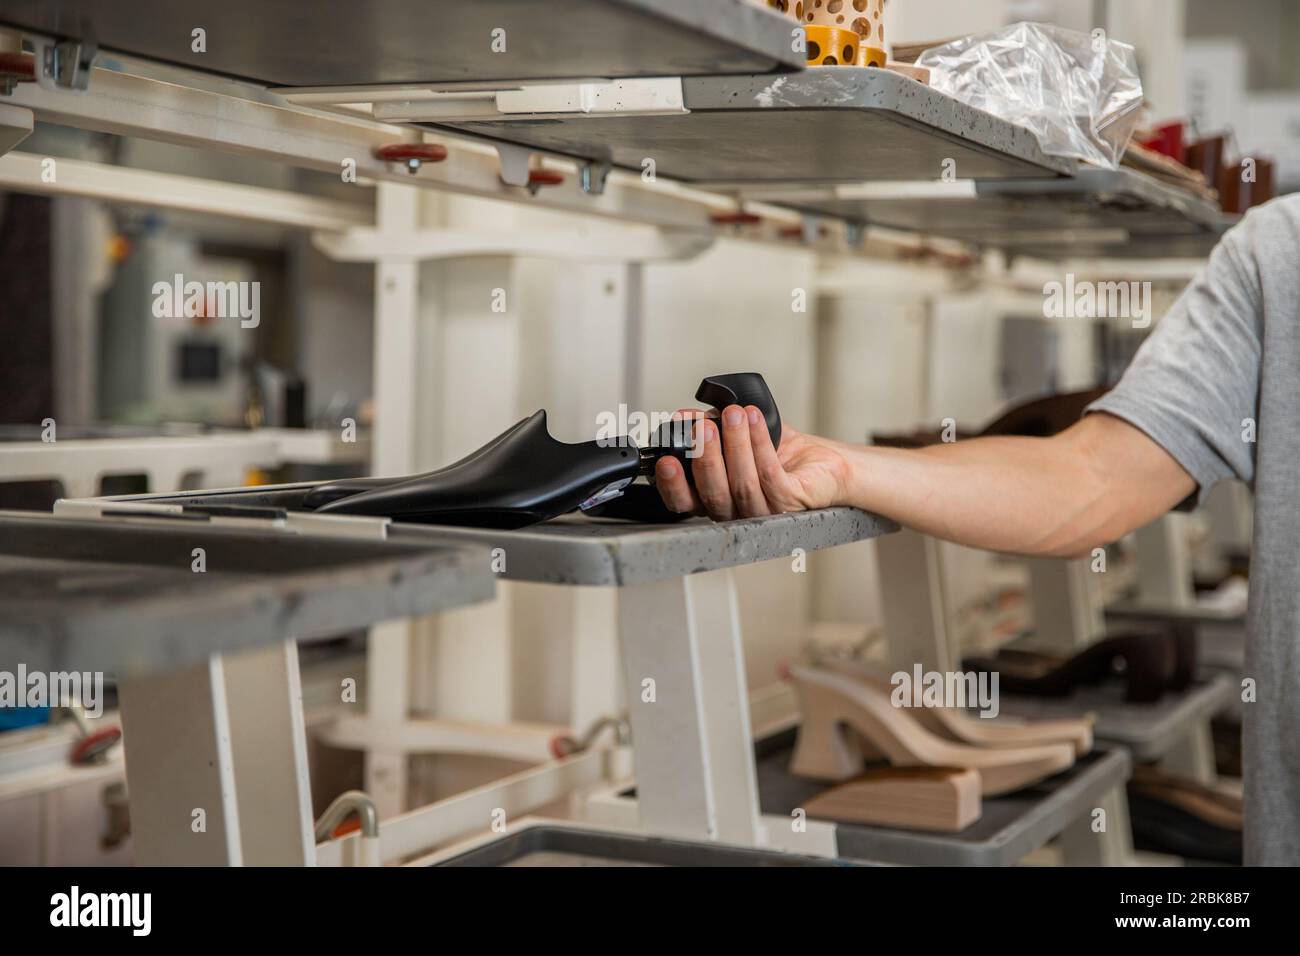 A shoe maker holding a shoe last inside the manufacturing factory Stock Photo